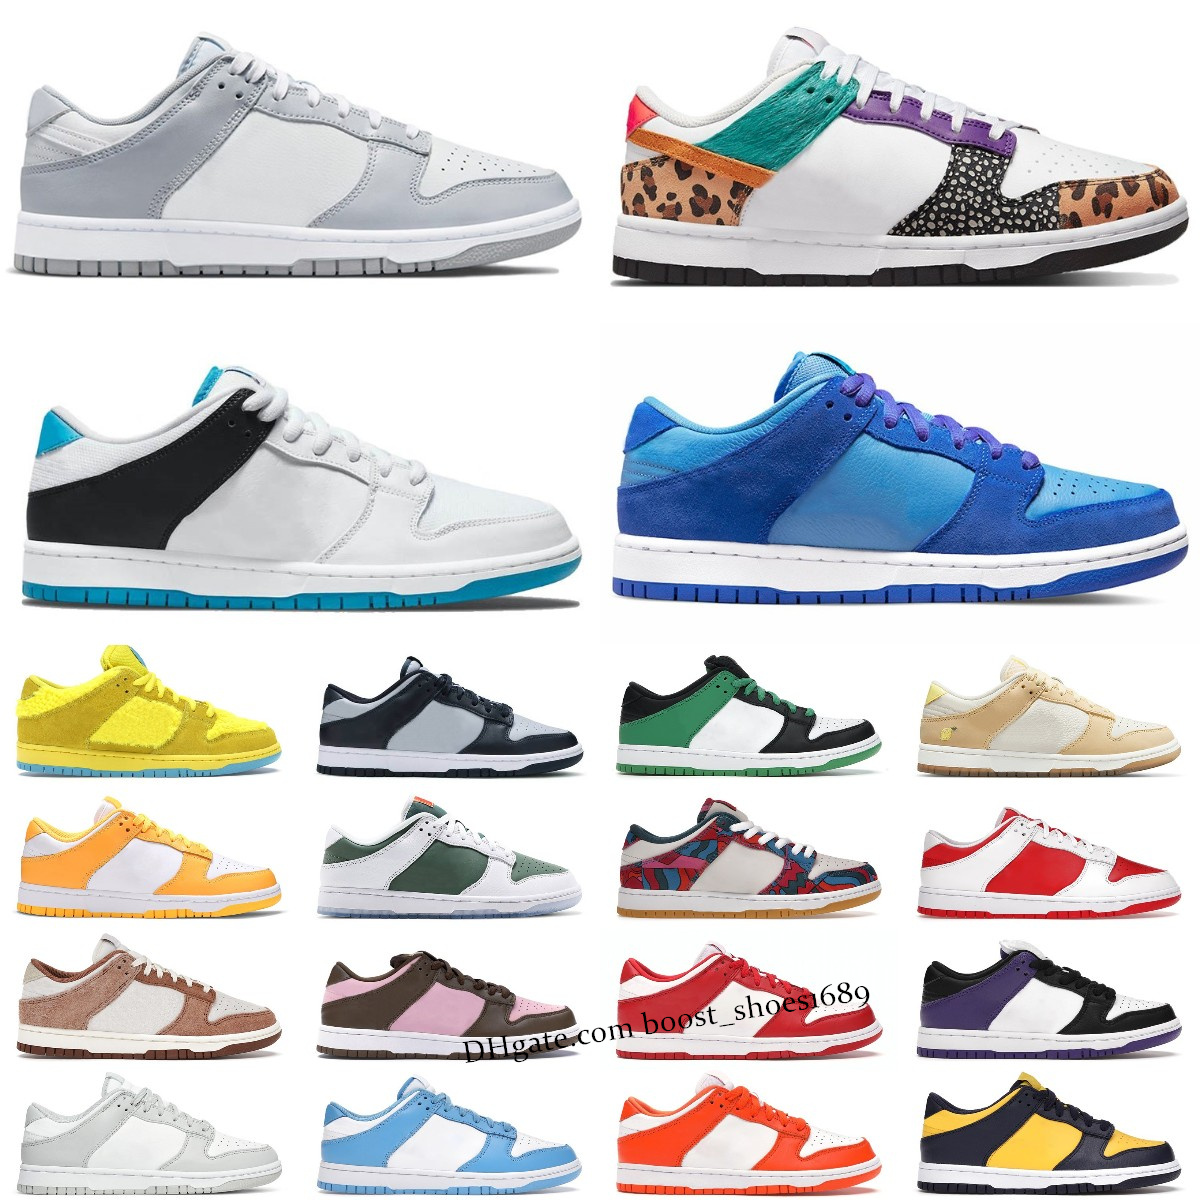 

Designer dunk Mens Women running Shoes sb Chunky Syracuse Canyon Rust Black White dunks Georgetown Sail Candy Court Purple Barber Shop Sail low Trainers Sneakers, Please contact us for more colors